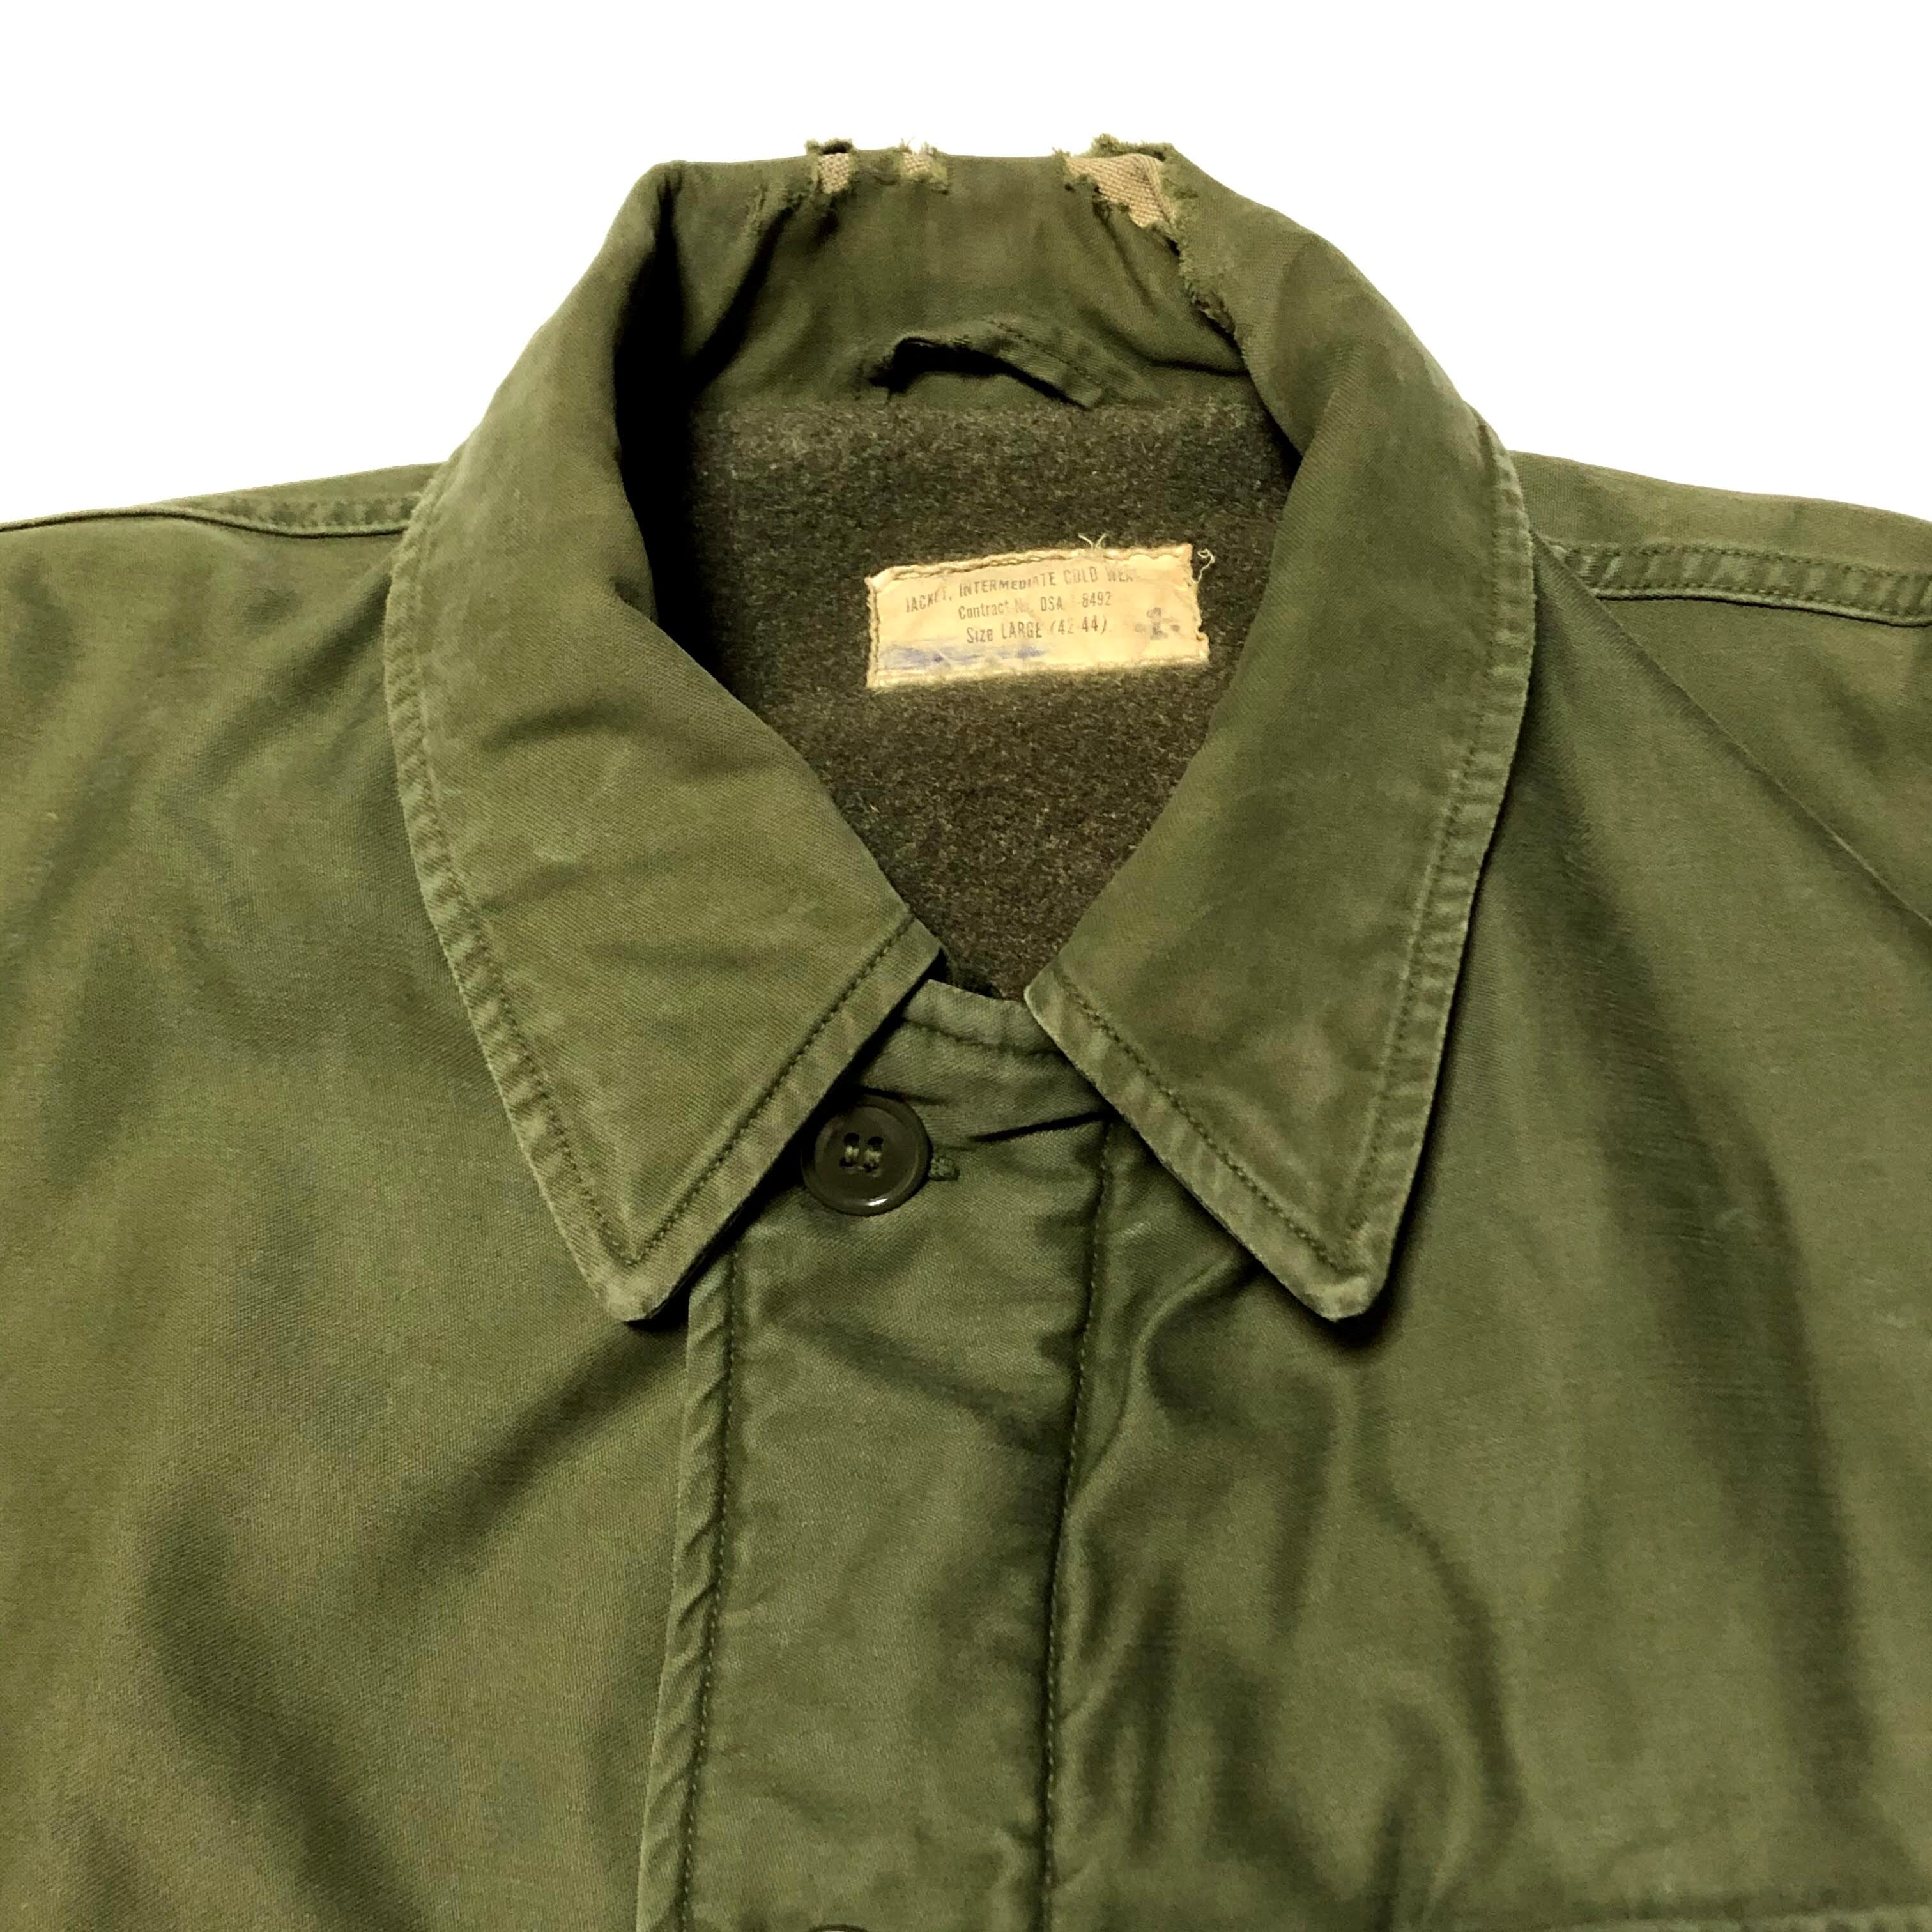 60s US NAVY A-2 DECK JACKET 初期型 三角フラップ(LARGE 42-44) 米軍 